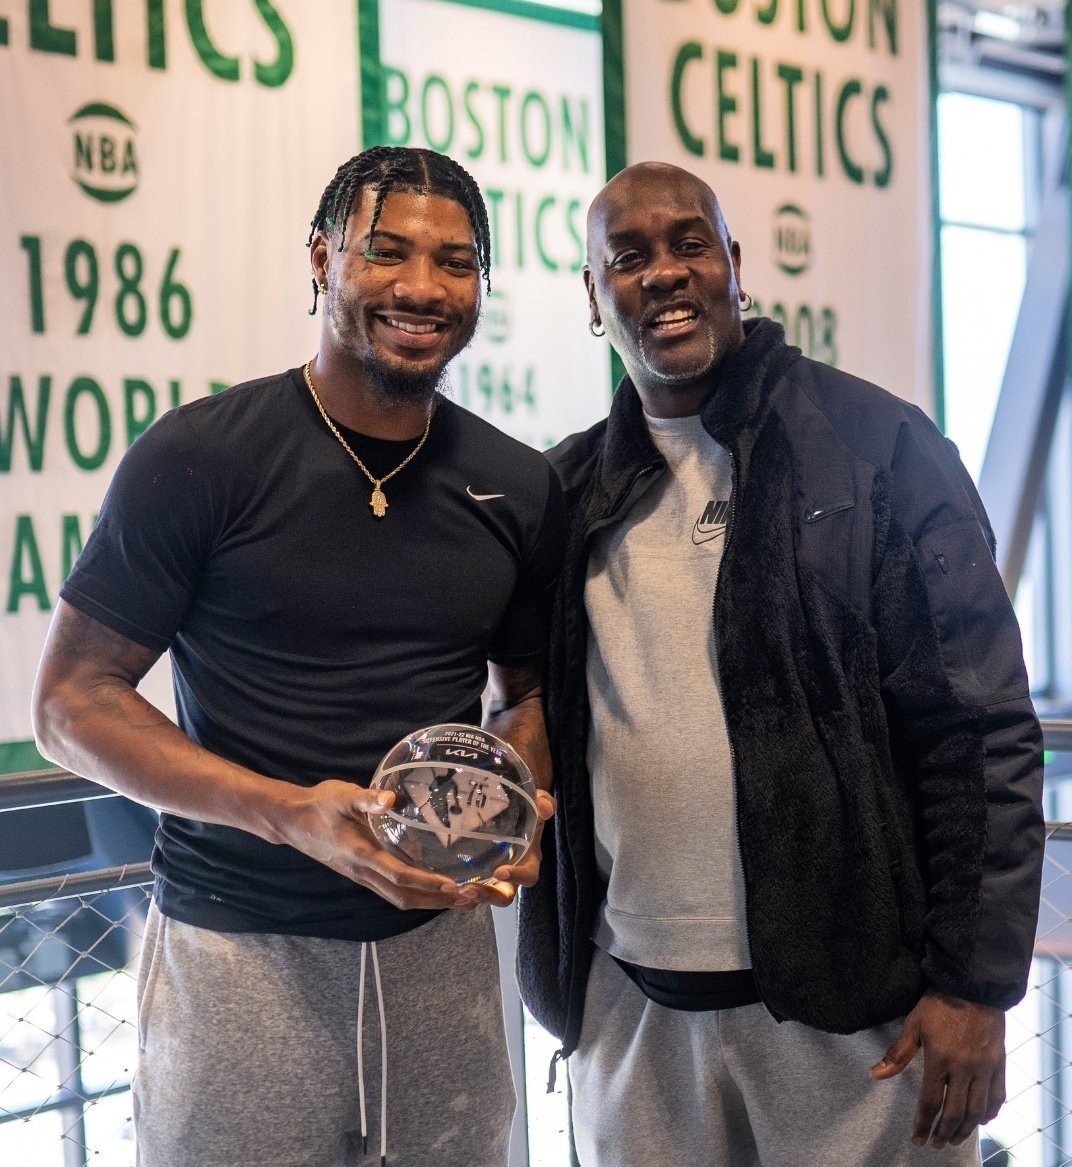 Marcus Smart receives the award